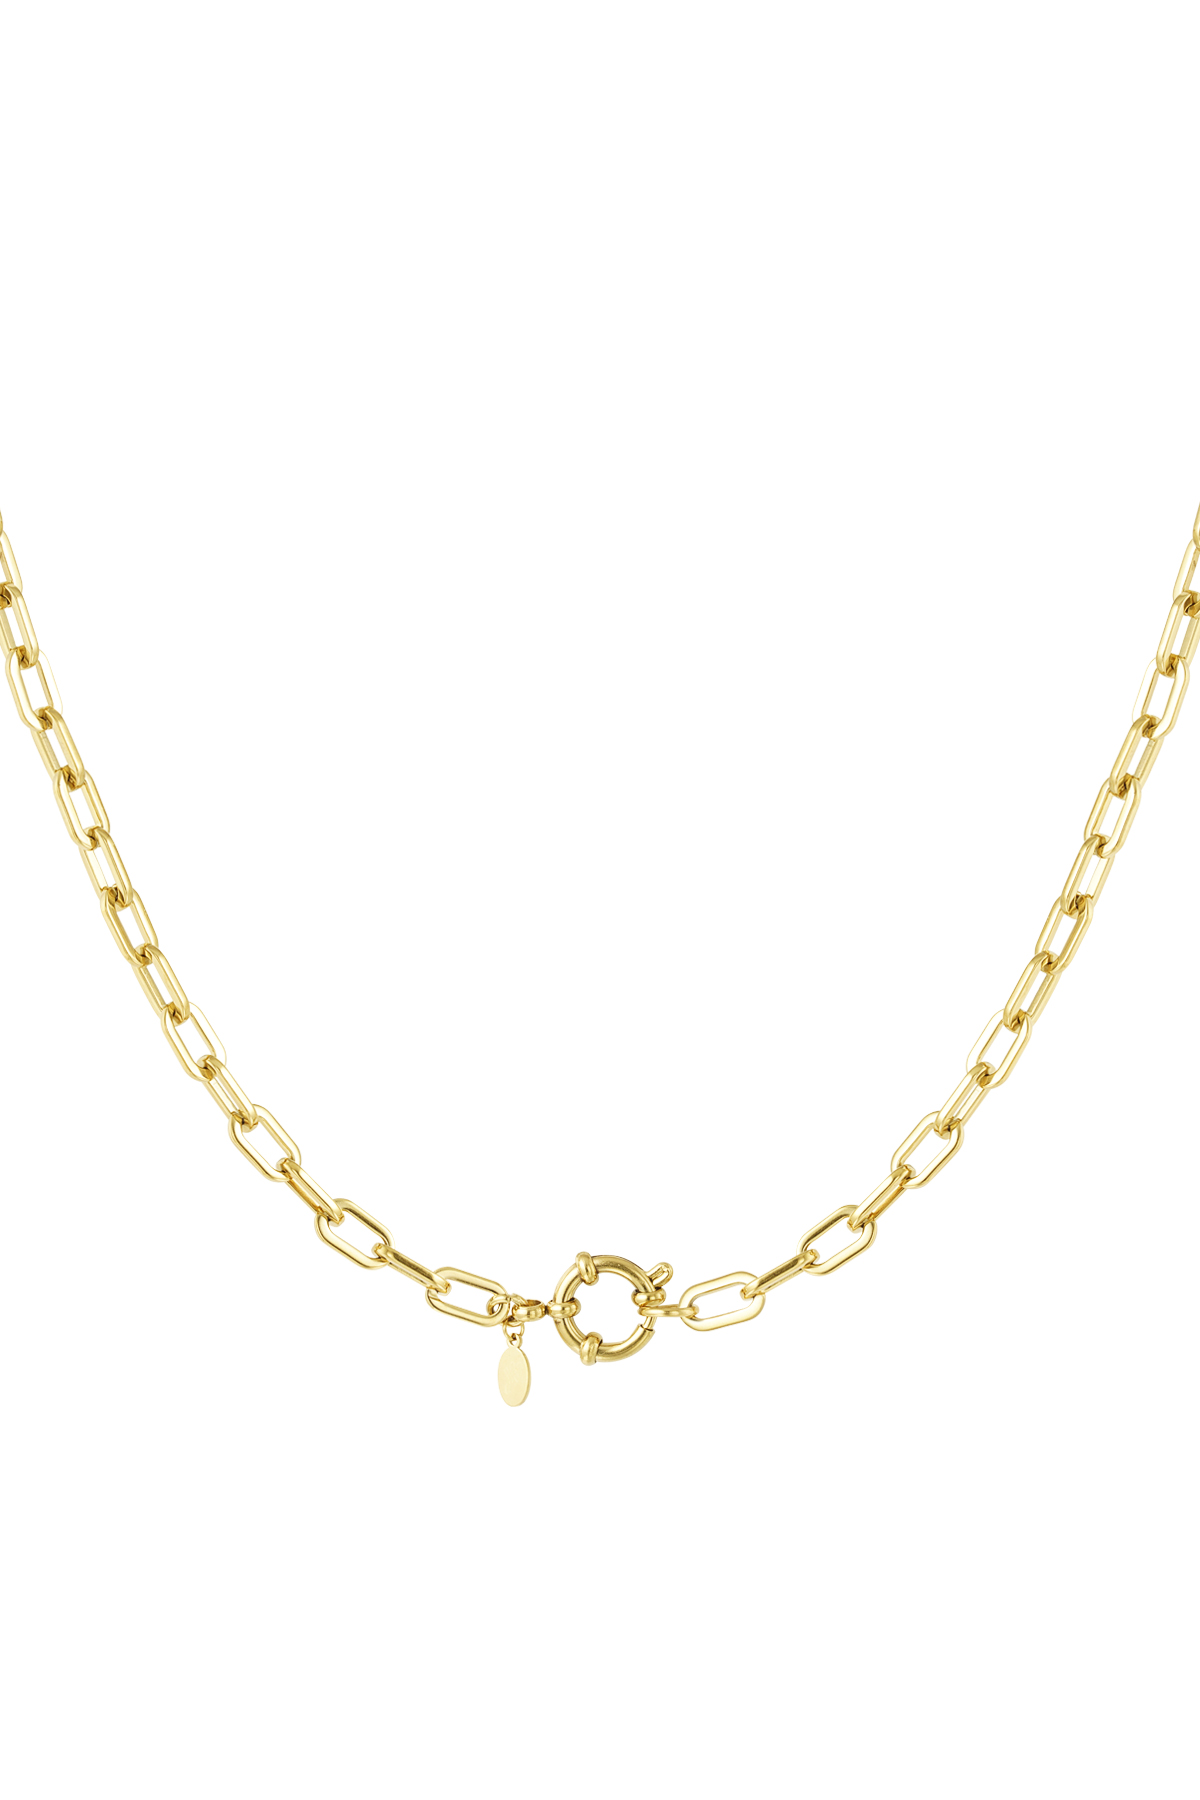 Necklace basic links round closure - gold h5 